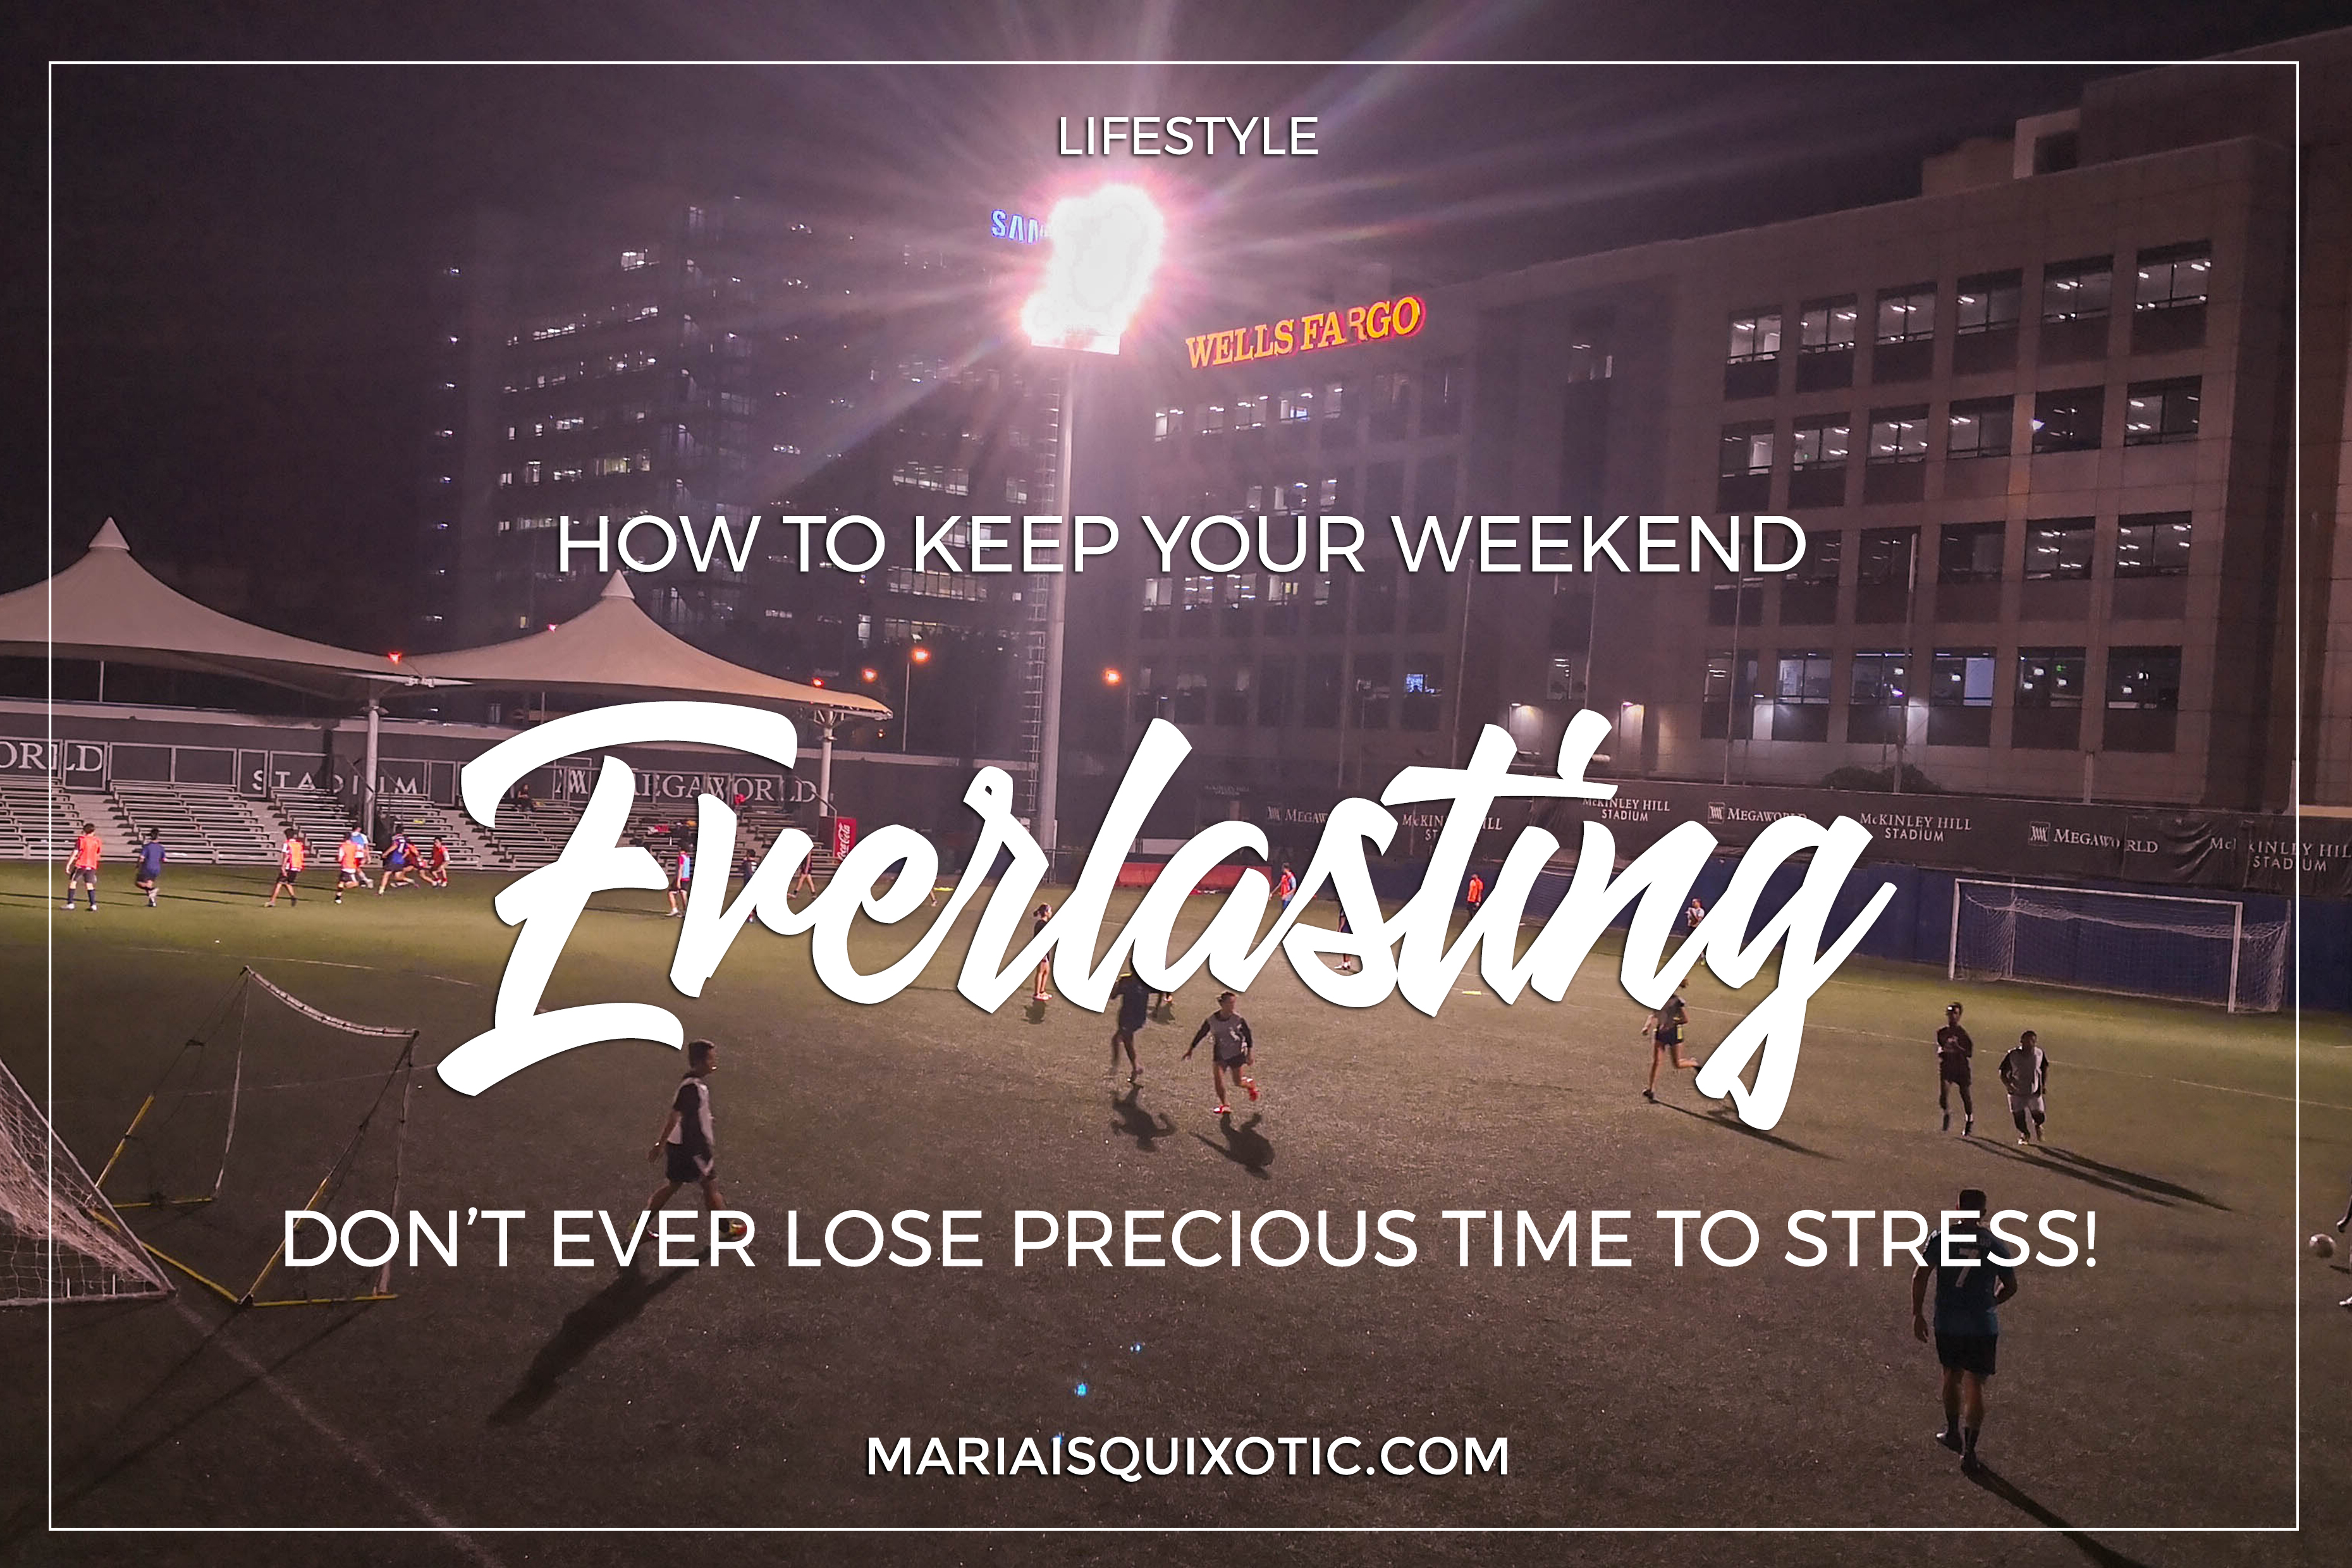 How to Keep Your Weekend Everlasting